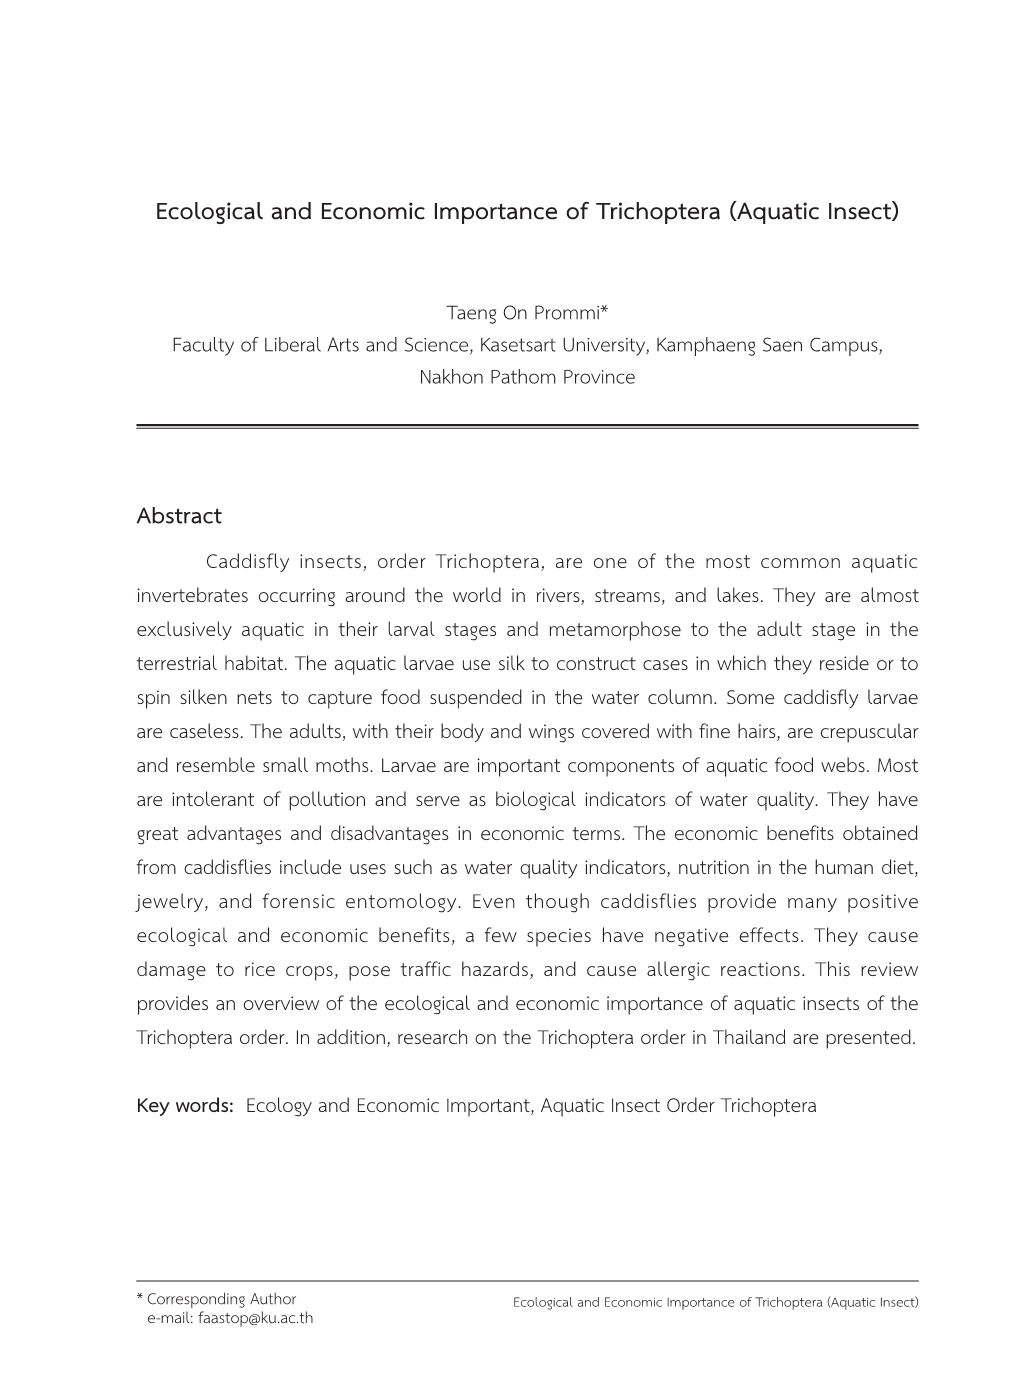 Ecological and Economic Importance of Trichoptera (Aquatic Insect)